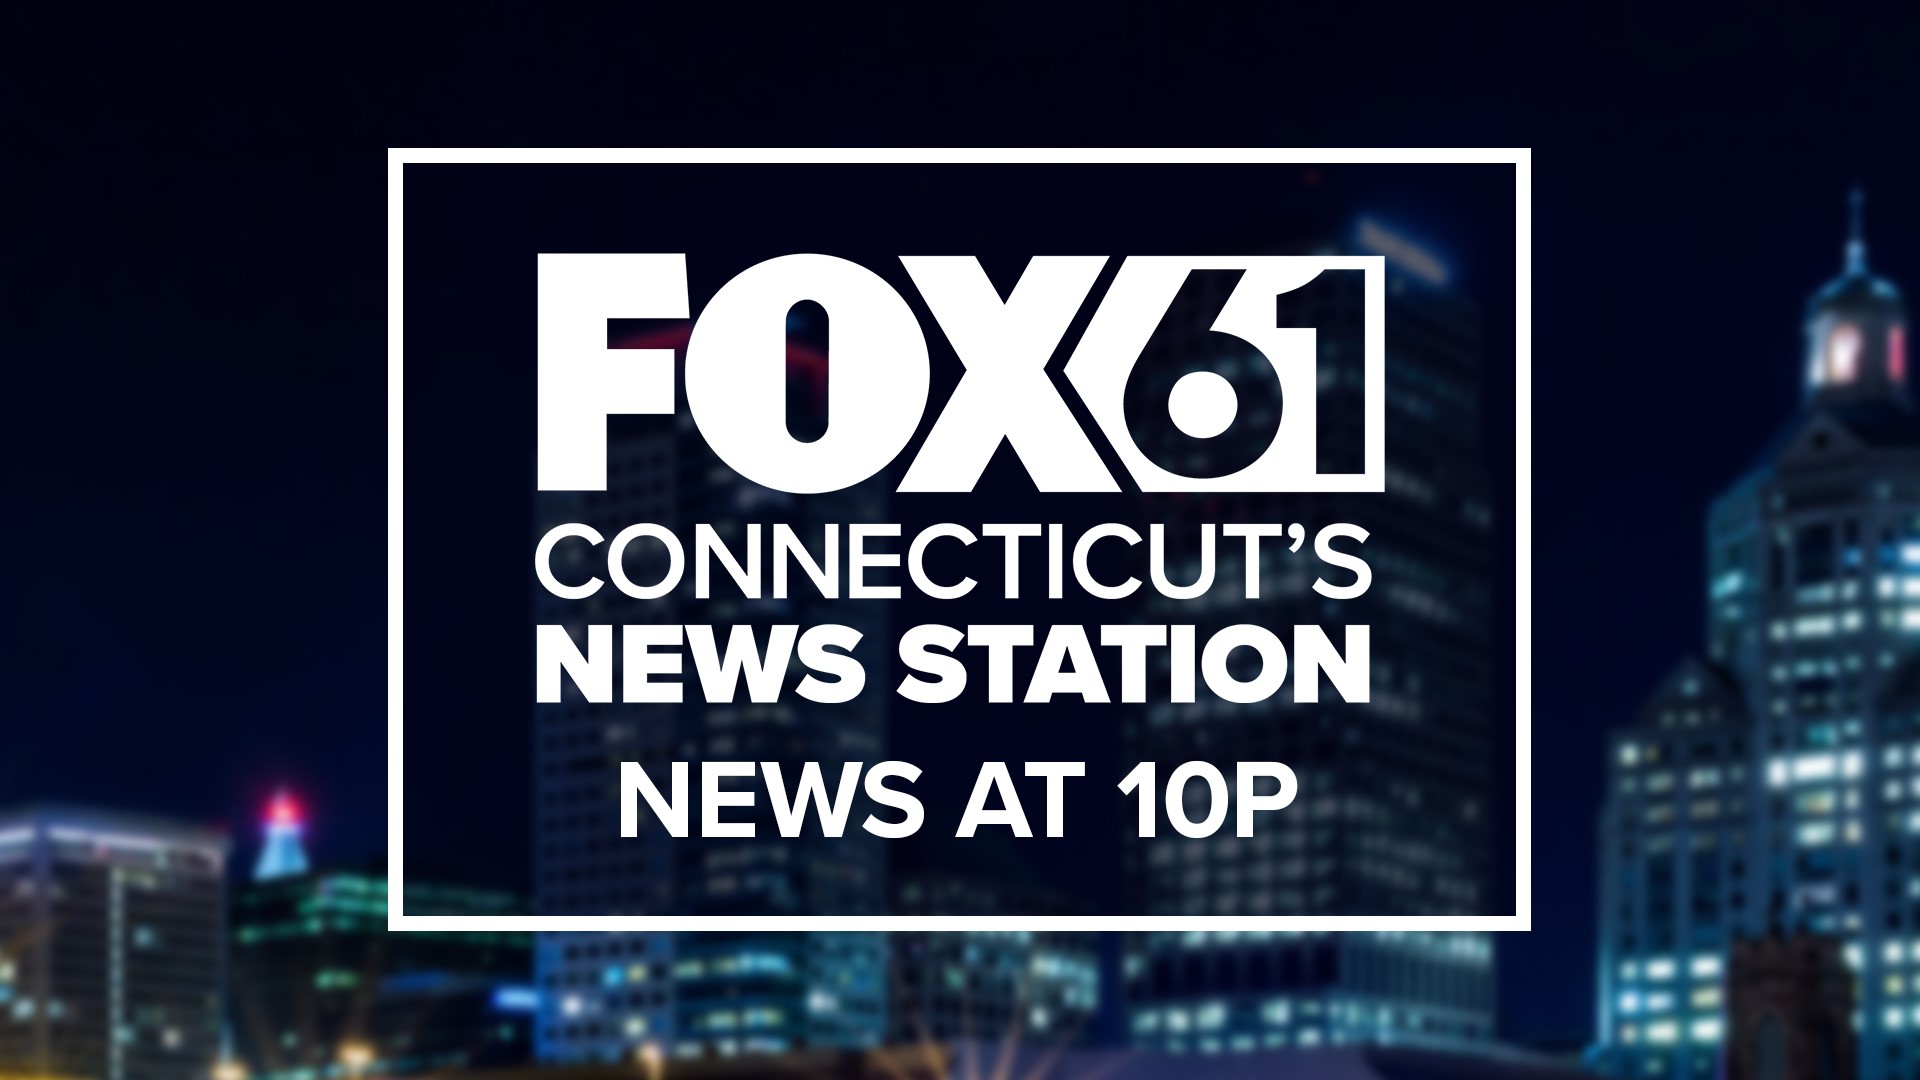 FOX61 News at 10P is the Right Place at the Right time.  Connecticut’s #1 prime time newscast provides in-depth coverage and perspective of the night’s stories.